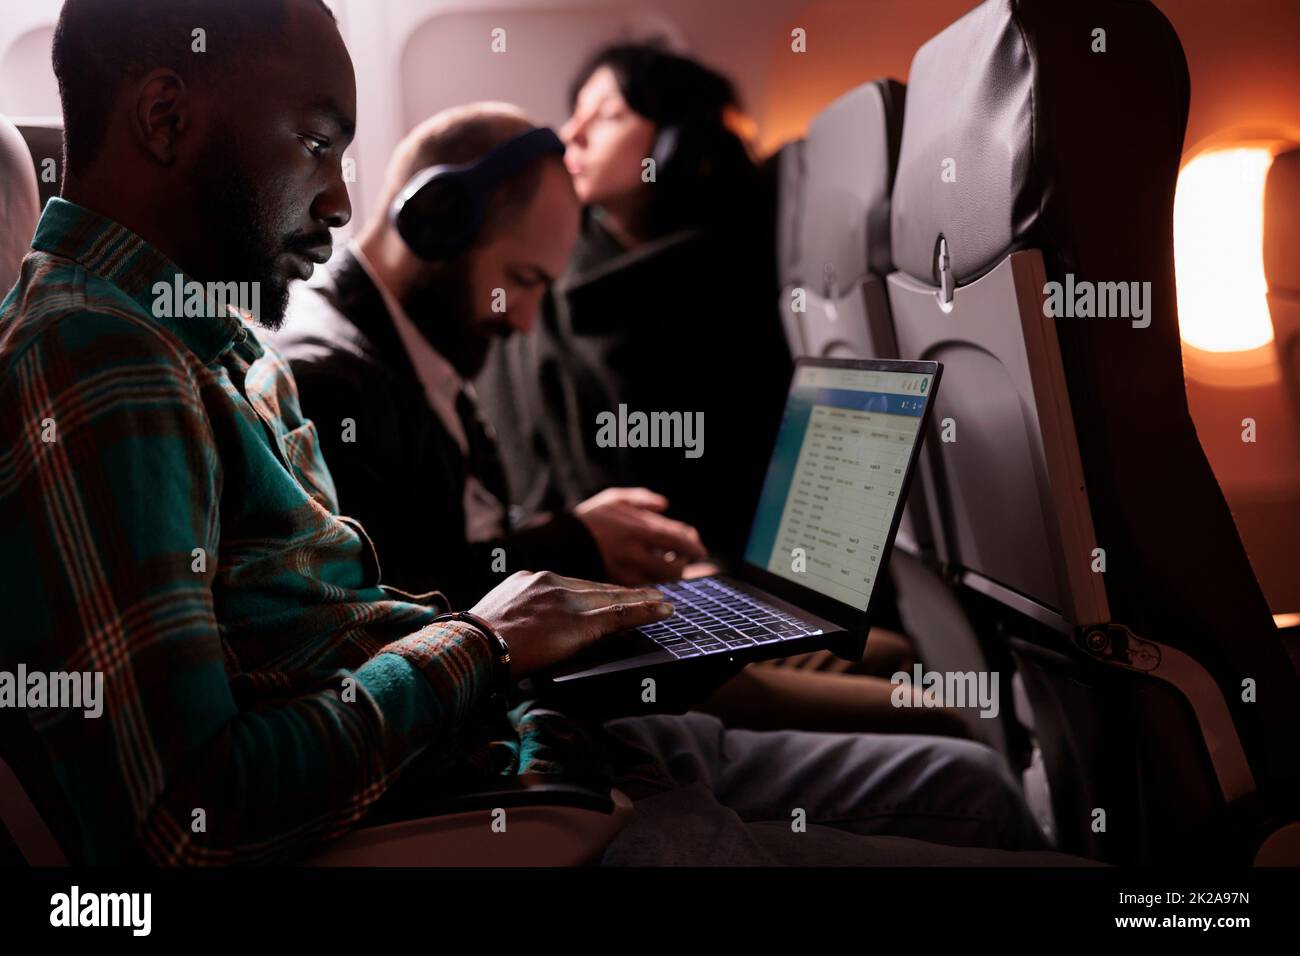 Diverse group of passengers flying in commercial class together to arrive at destination, man using laptop computer during international flight. Tourists travelling abroad by airplane. Stock Photo